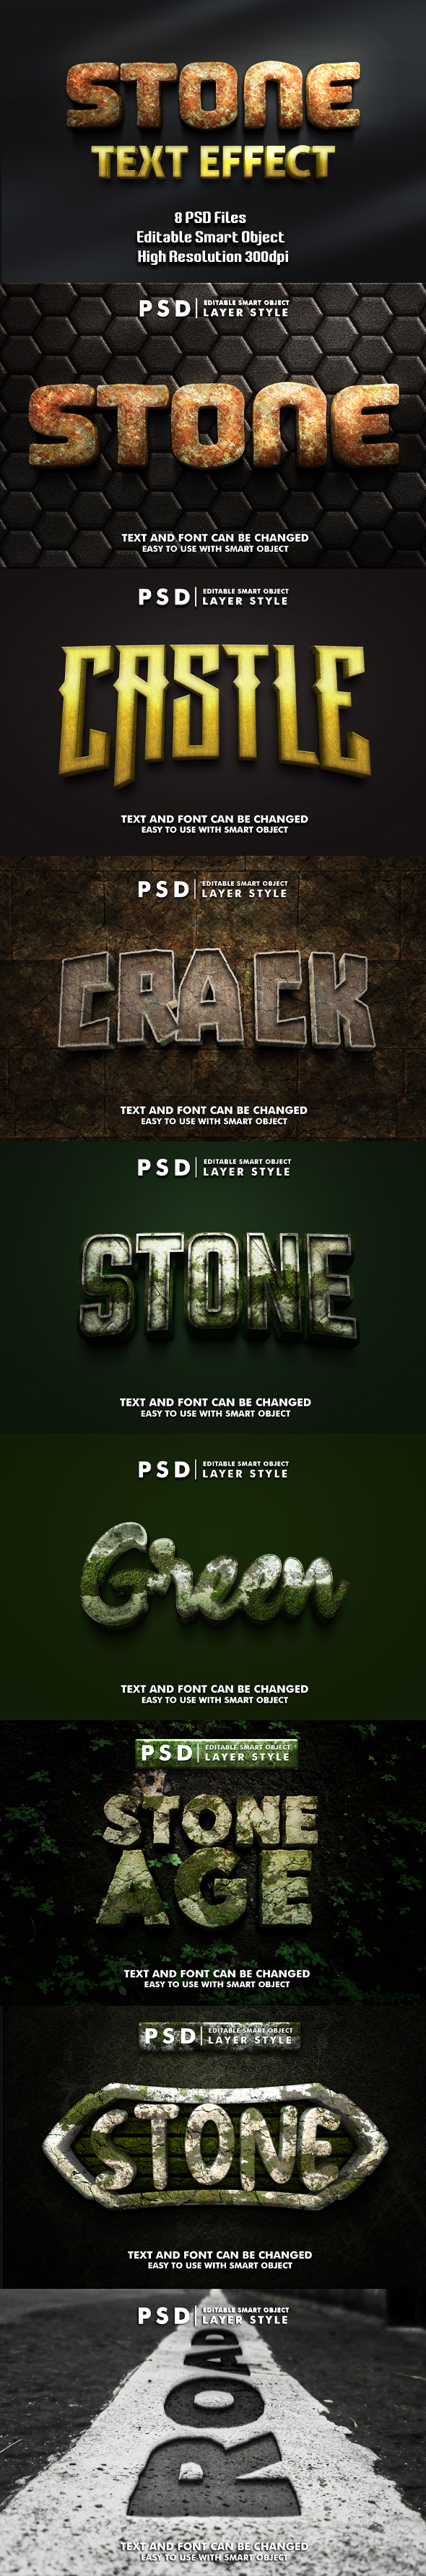 The Best of Stone Psd Text Effect